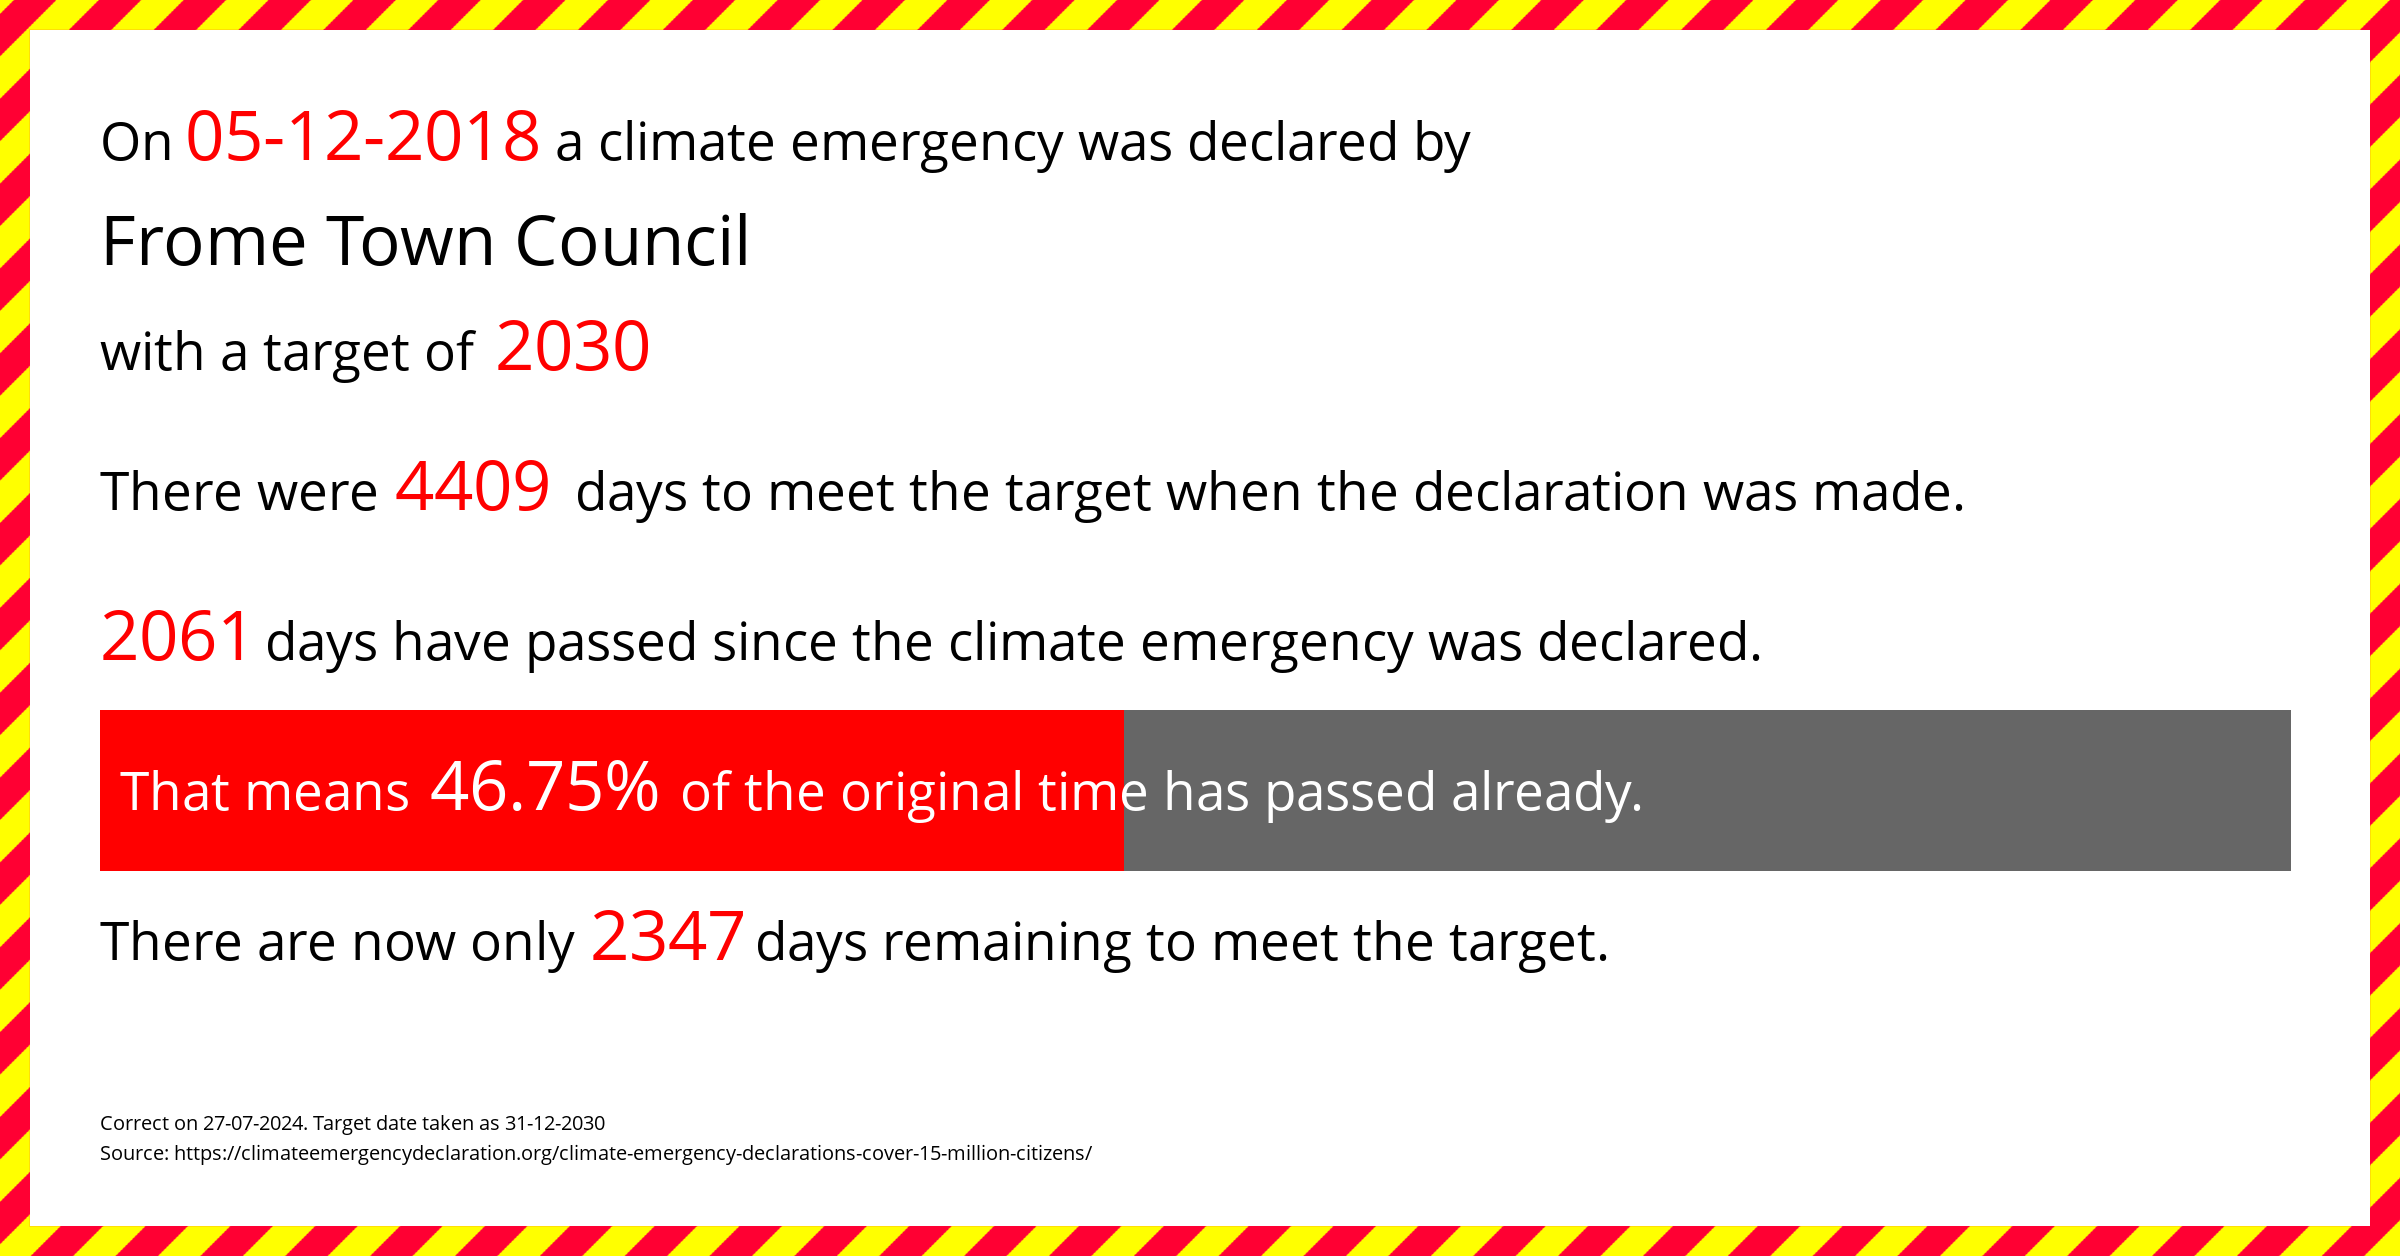 Frome Town Council declared a Climate emergency on Wednesday 5th December 2018, with a target of 2030.